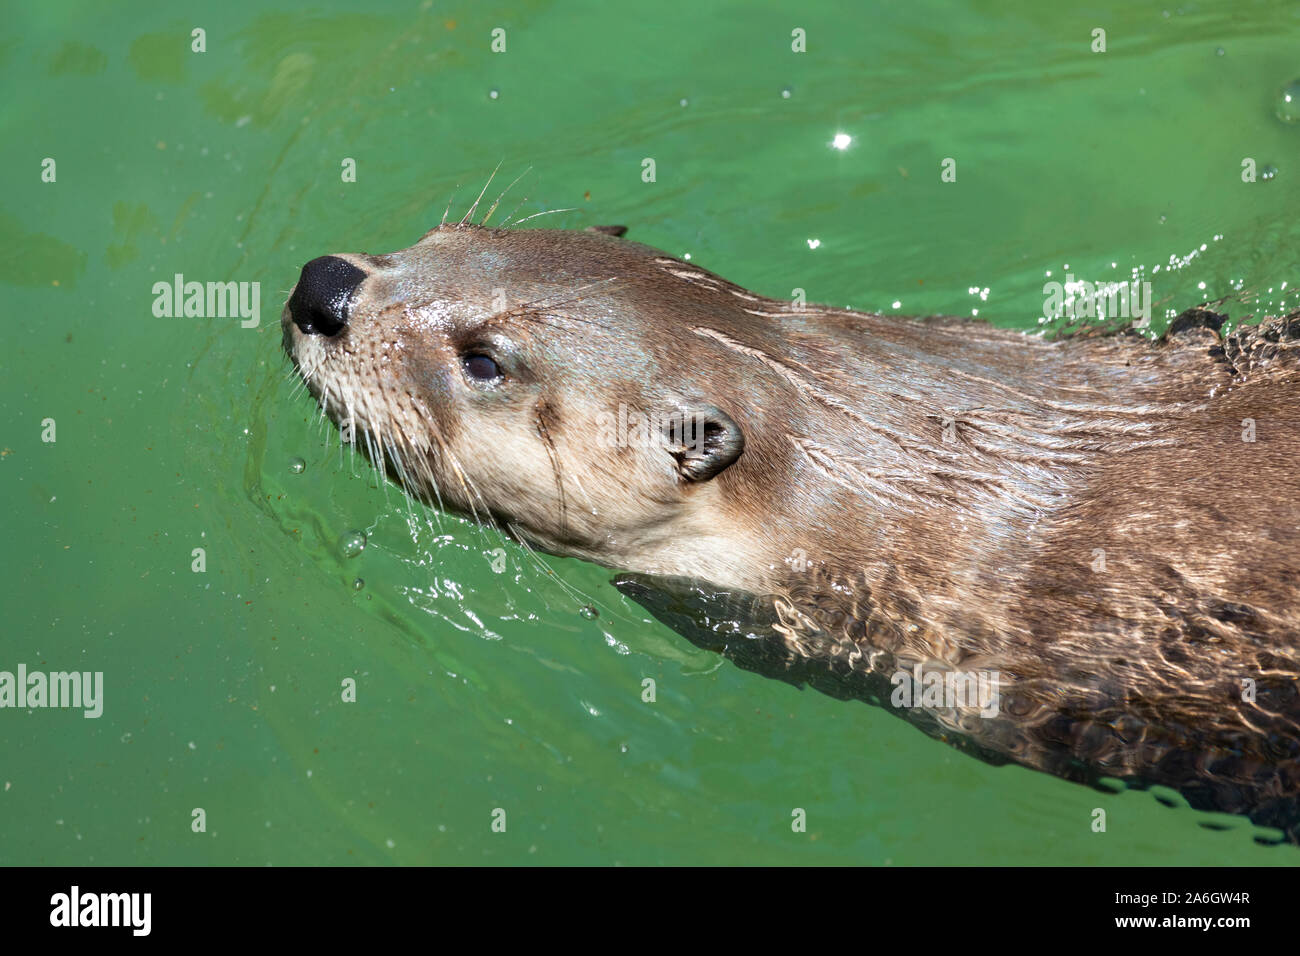 otter an aquatic mammal usually found in family groups Stock Photo